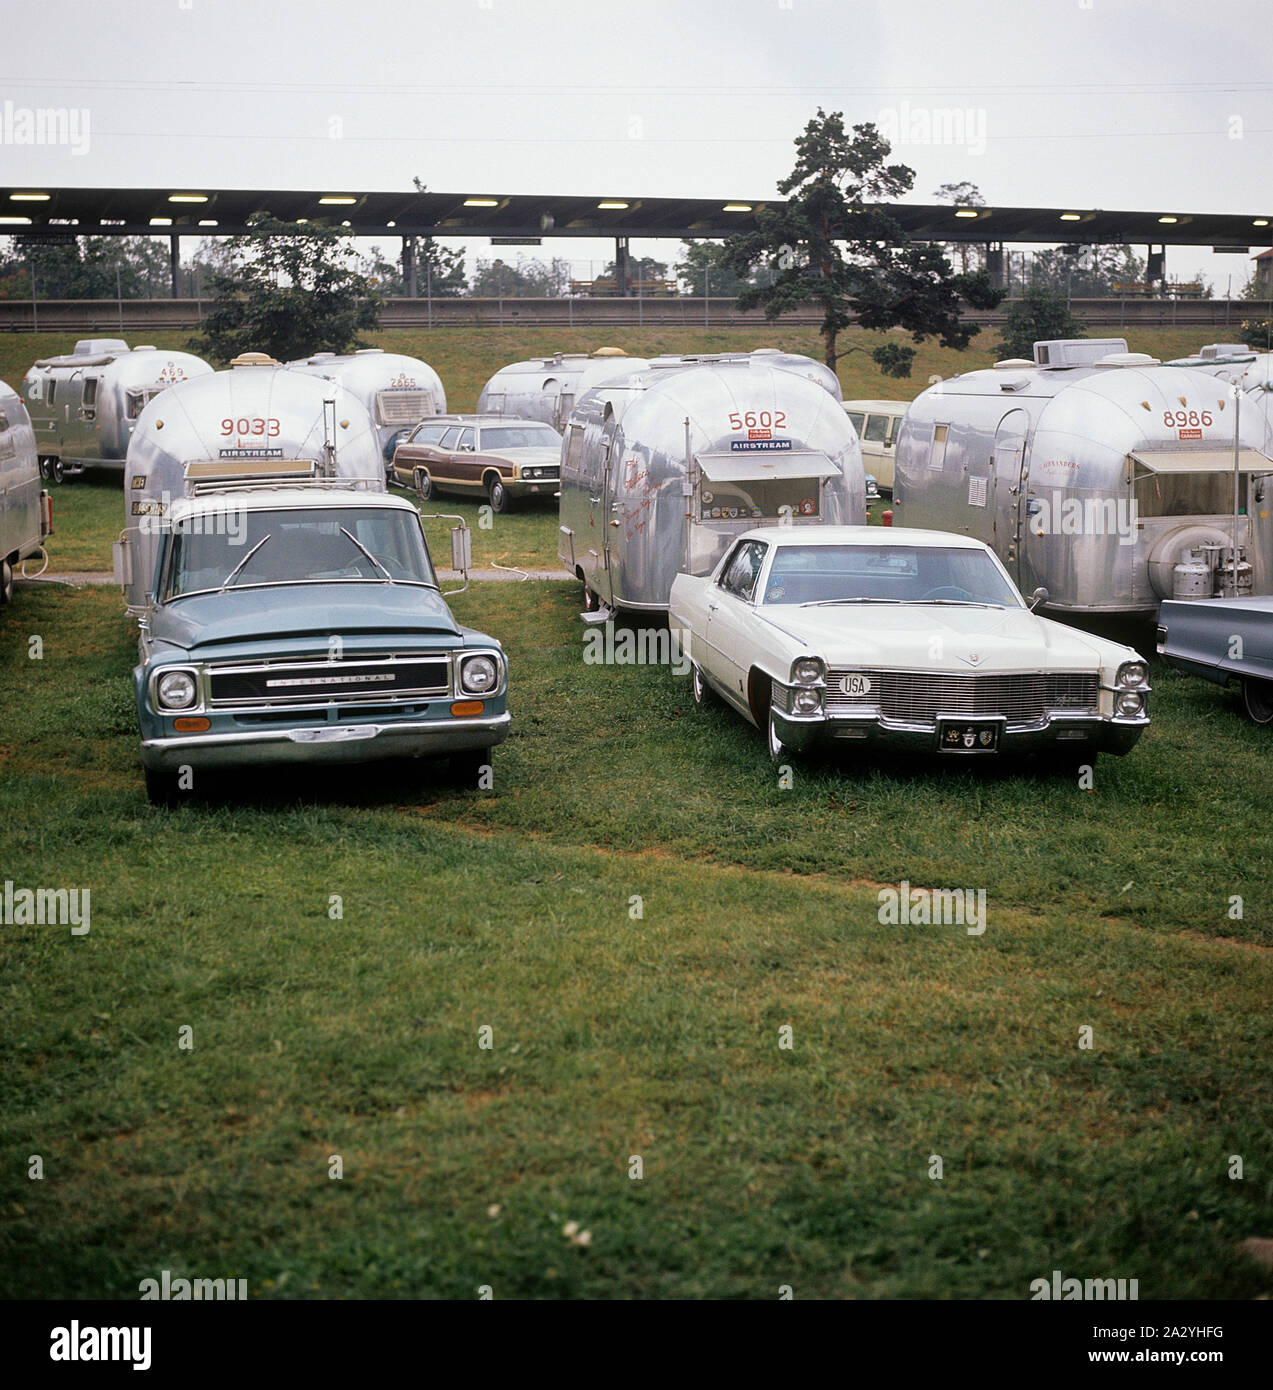 1970s camping. Pictured an American Airstream caravan in aluminium and in the typical 1930s streamline design. The caravan was designed by Hawley Bowlus who was inspirered by the airplane Spirit of St. Louis. Around the world, owners of Airstream caravans meet and this picture was taken in Sweden on September 21 1971. Stock Photo